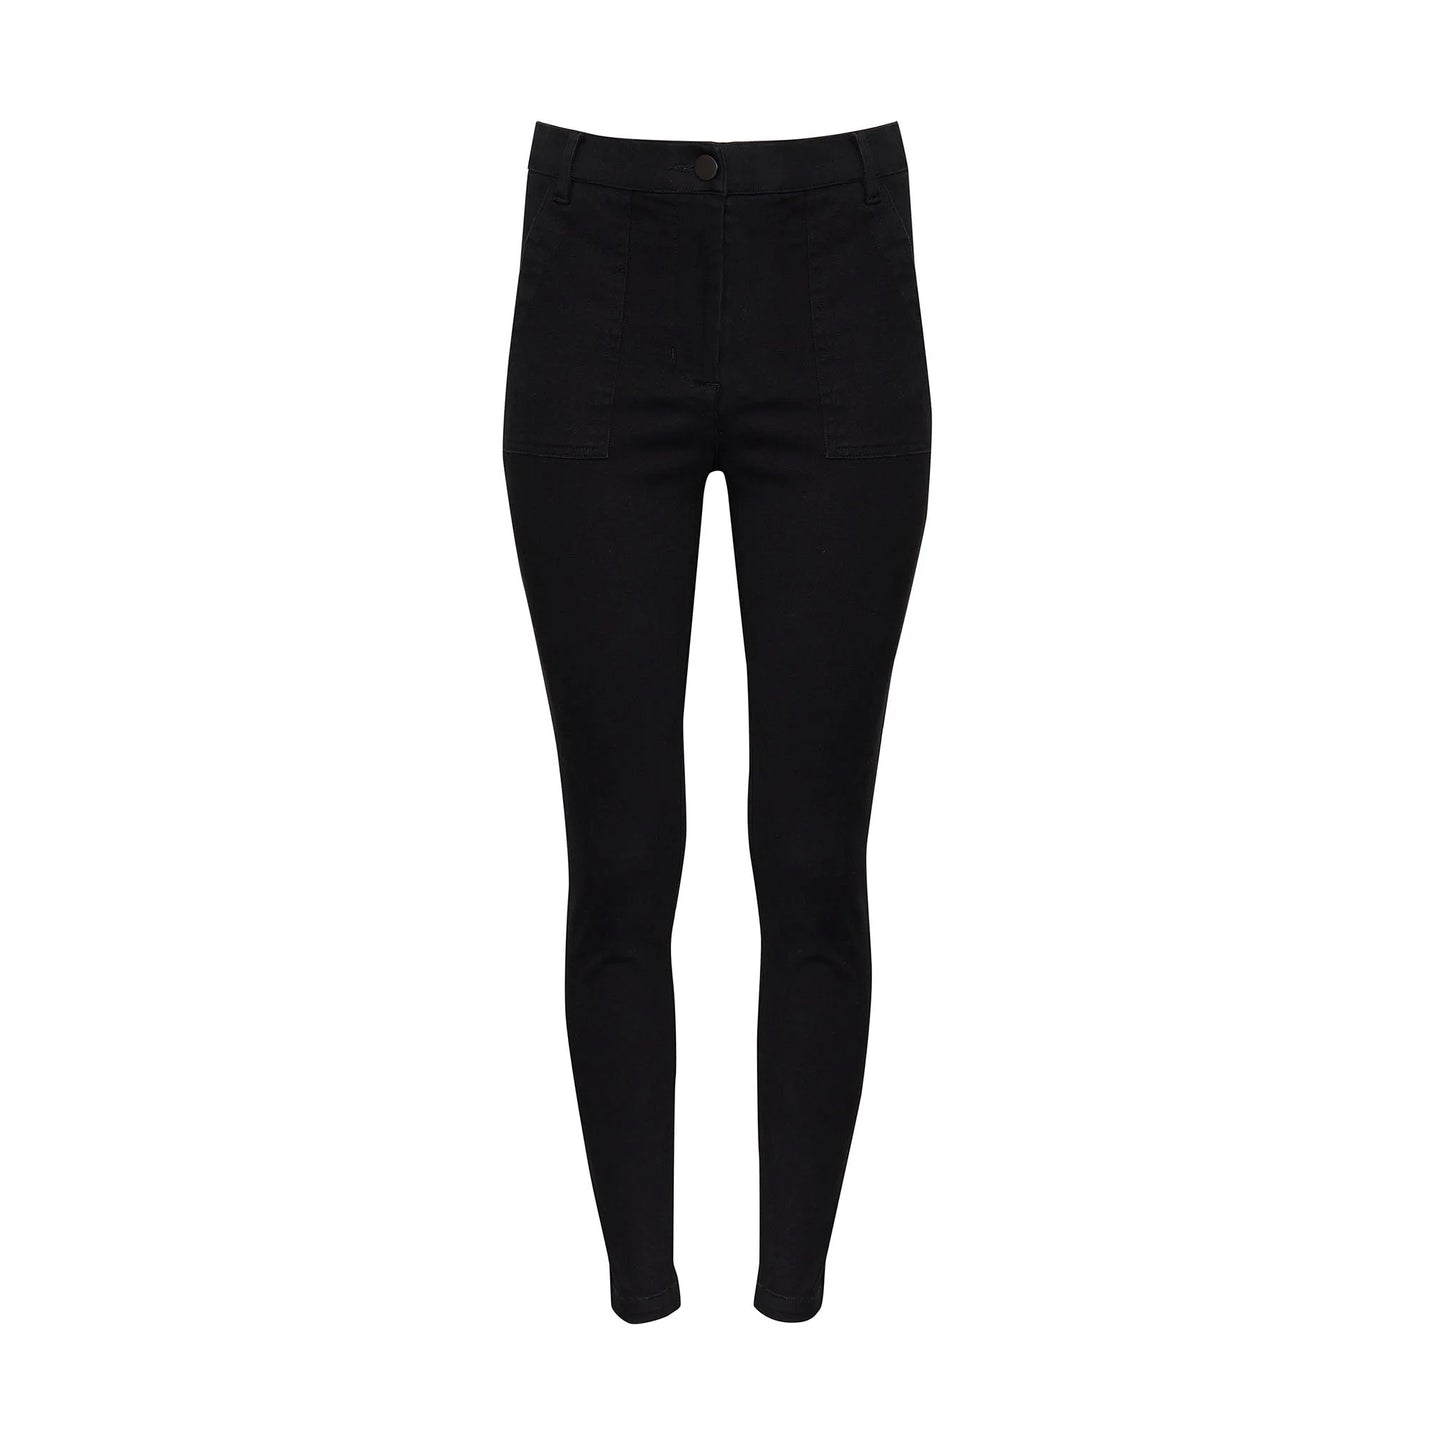 Allied Pant in Black